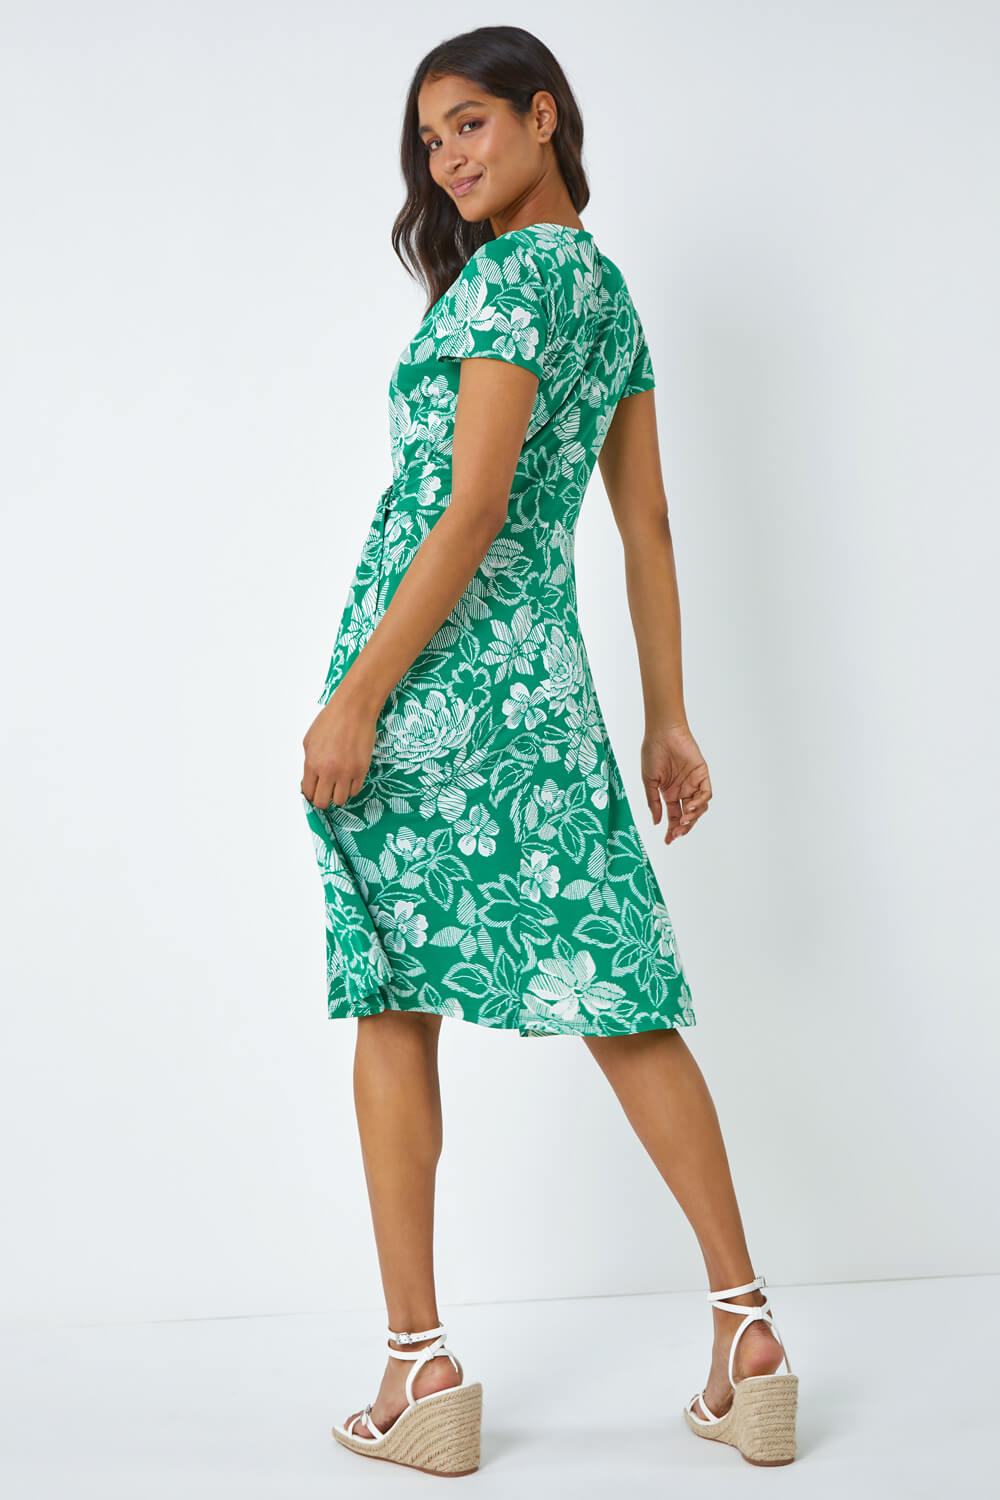 Green Floral Print Stretch Wrap Dress, Image 3 of 5